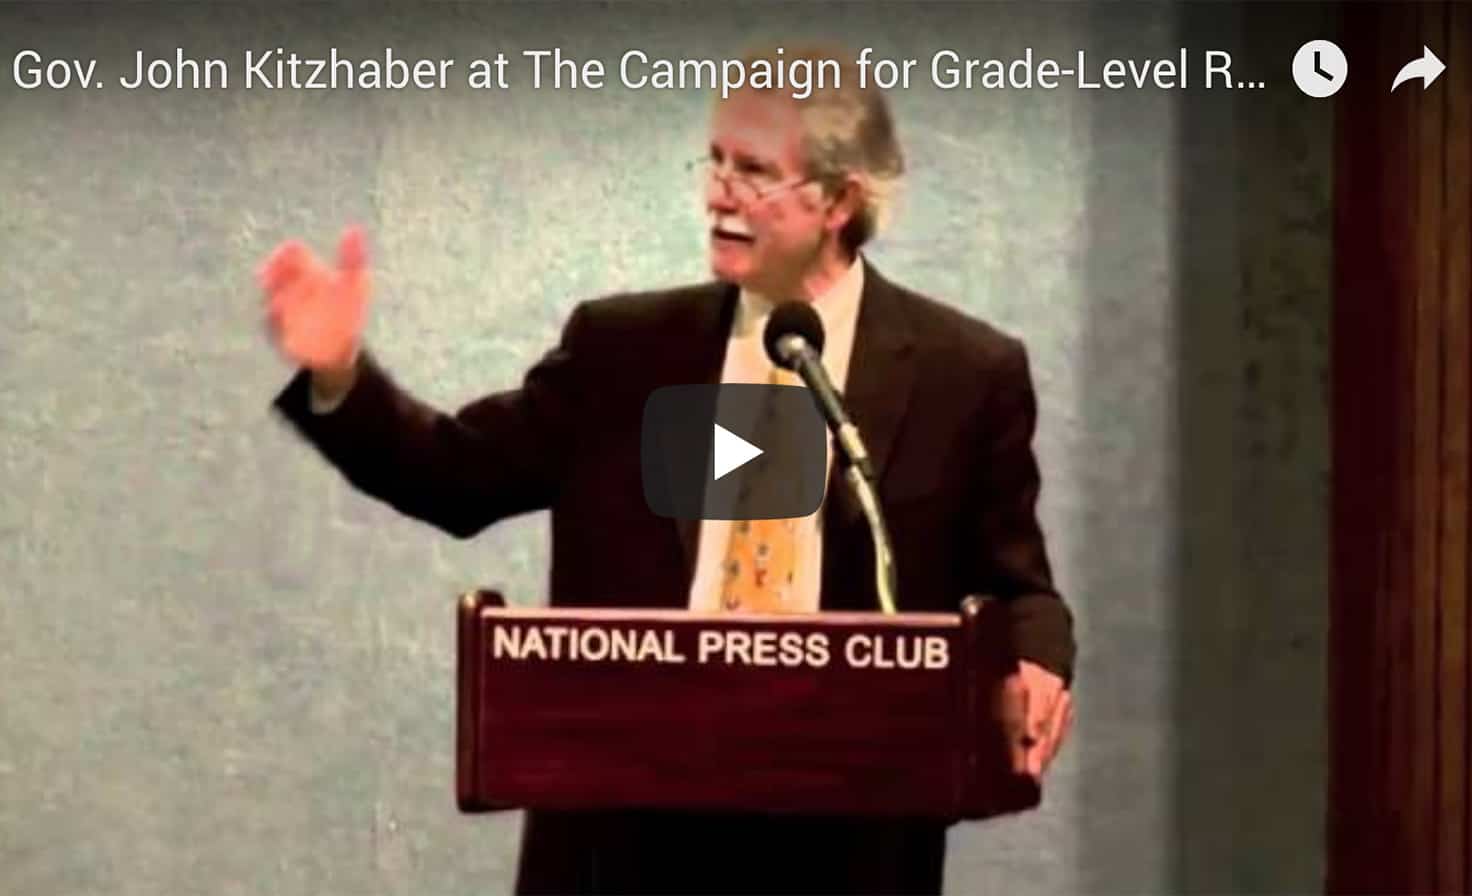 Governor Kitzhaber addresses the Campaign for Grade-Level Reading